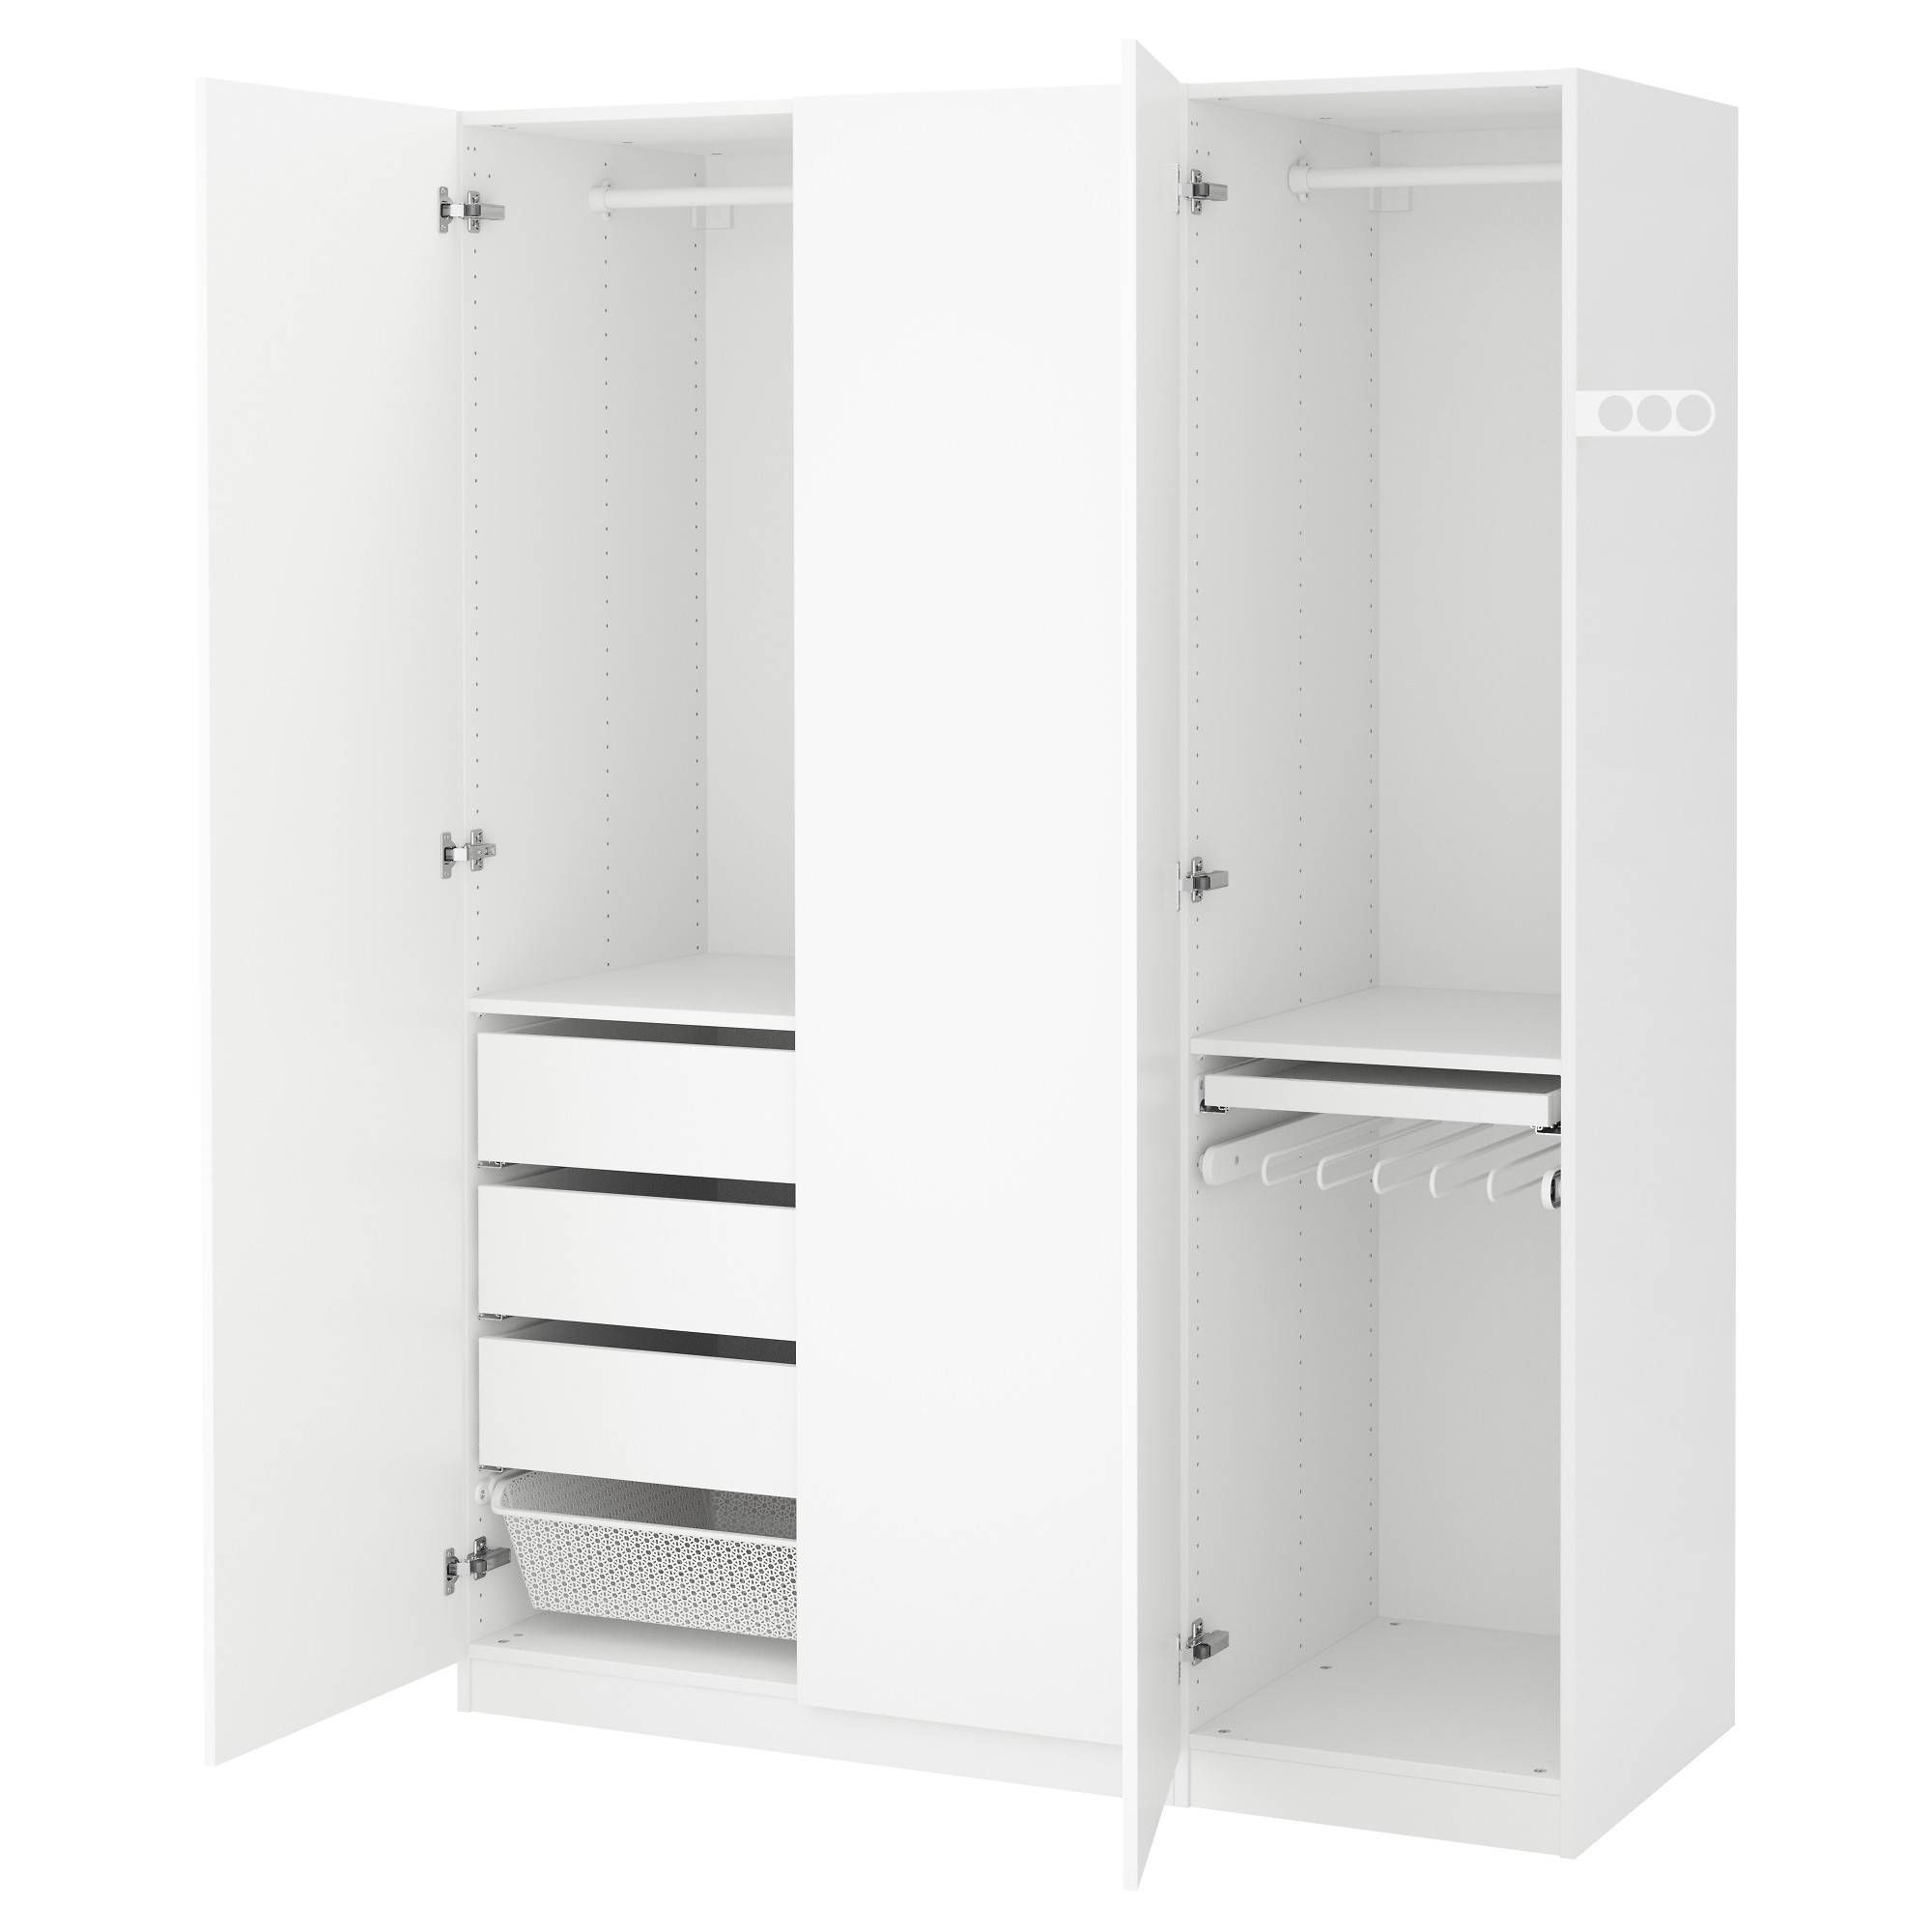 Wardrobes | Ikea Intended For Tall White Wardrobes (View 2 of 15)